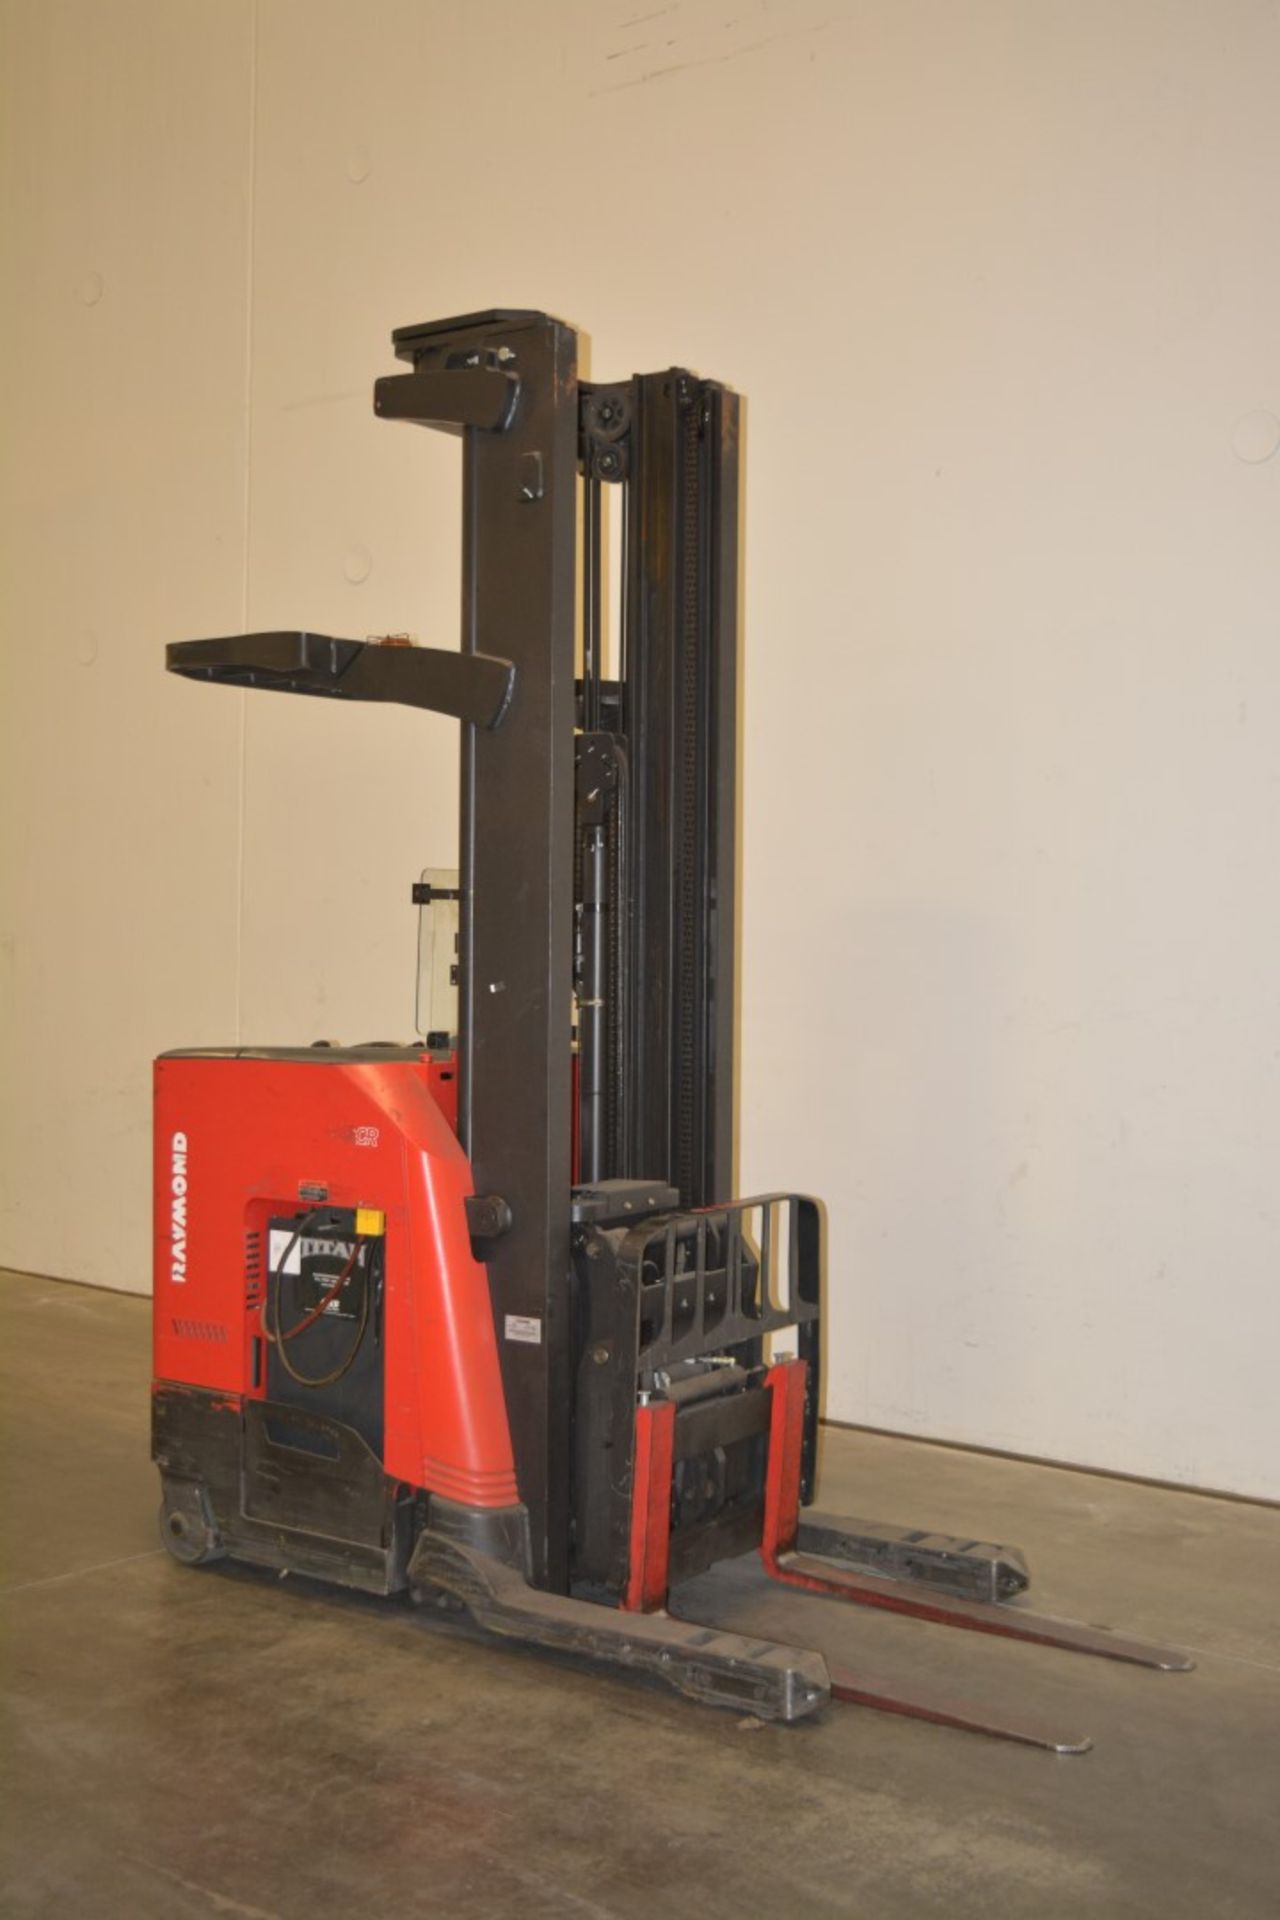 2013 RAYMOND 3200 LBS CAPACITY DOUBLE REACH-IN TRUCK/FORKLIFT. (WATCH VIDEO) - Image 2 of 6